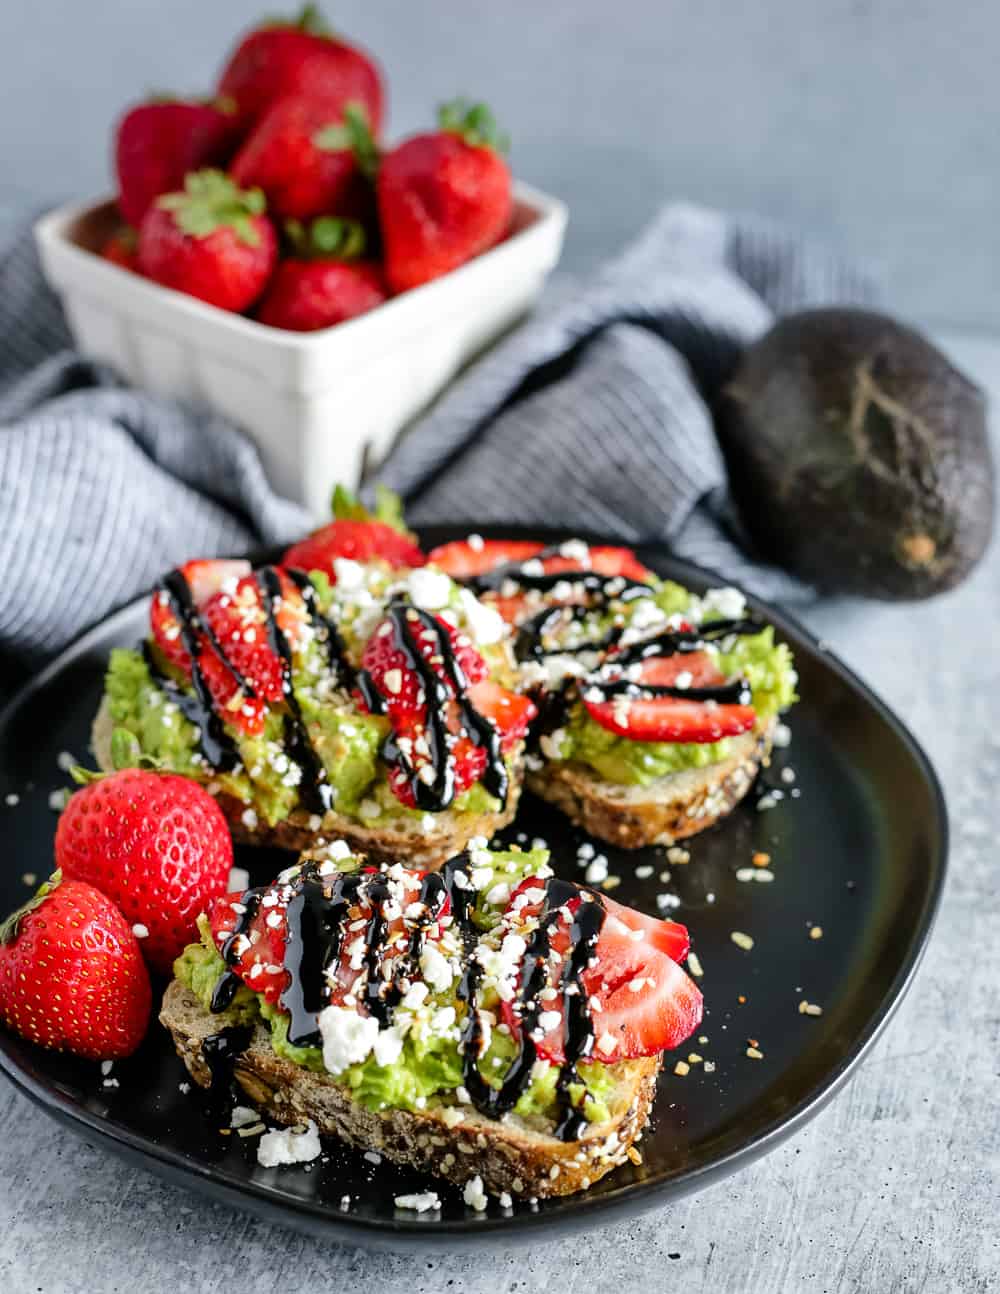 Three thick slices of avocado toast on a black plate, topped with sliced strawberries, feta cheese, and balsamic glaze